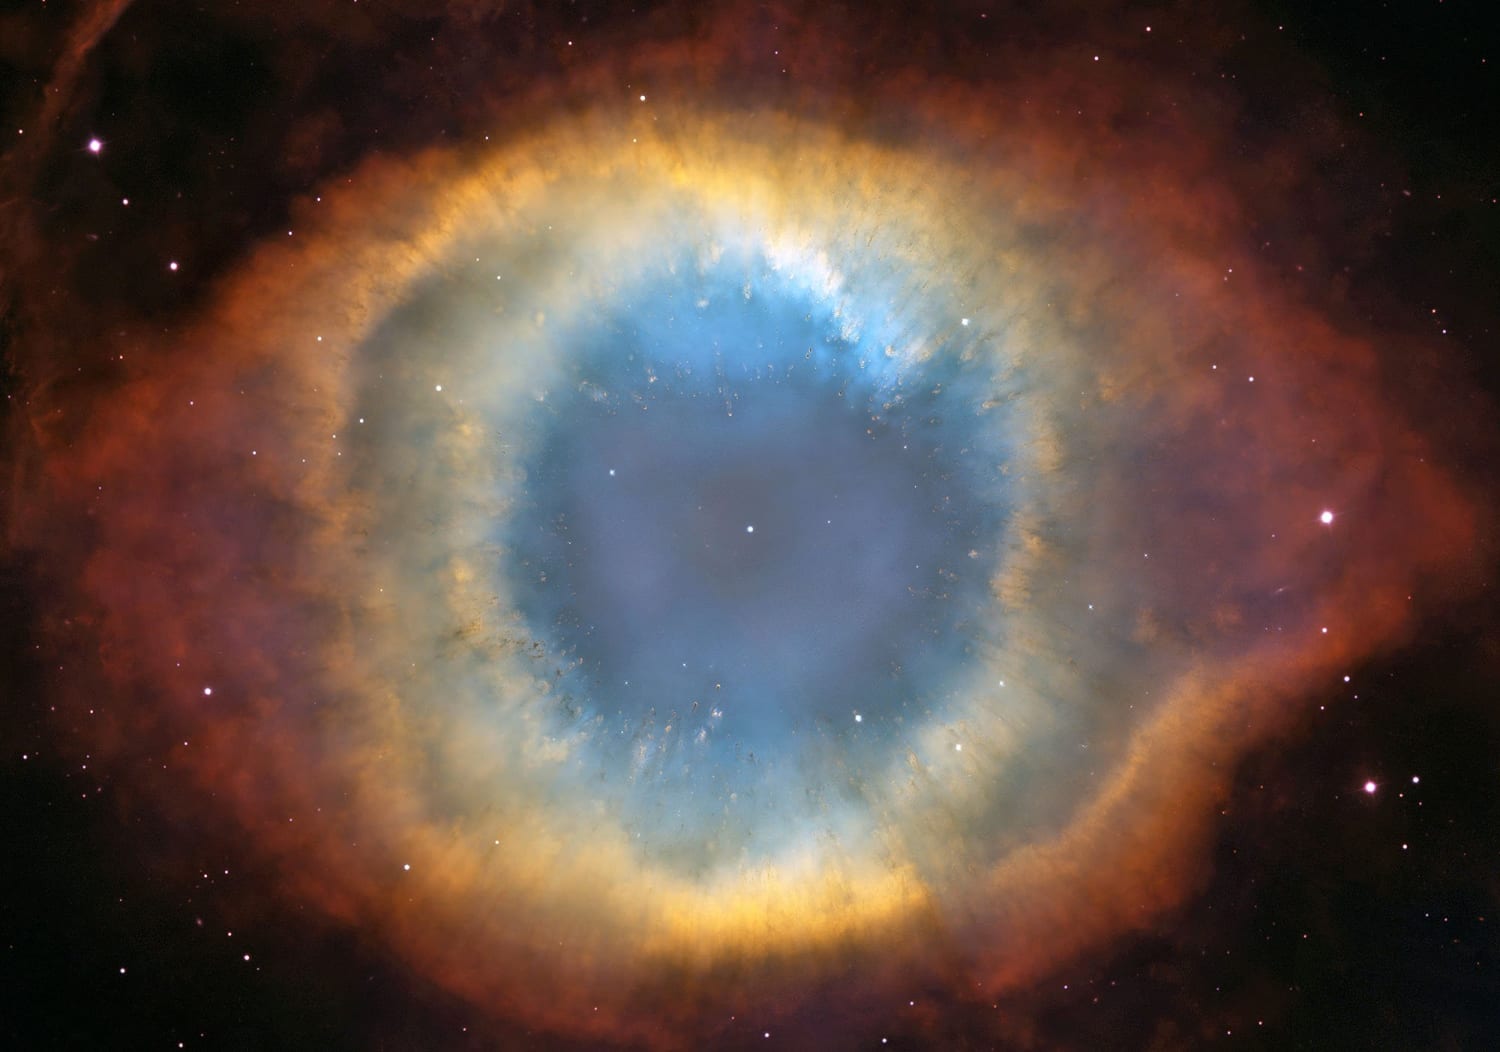 Day 9 of the 2016 Hubble Space Telescope Advent Calendar: A close-up of the Helix Nebula -